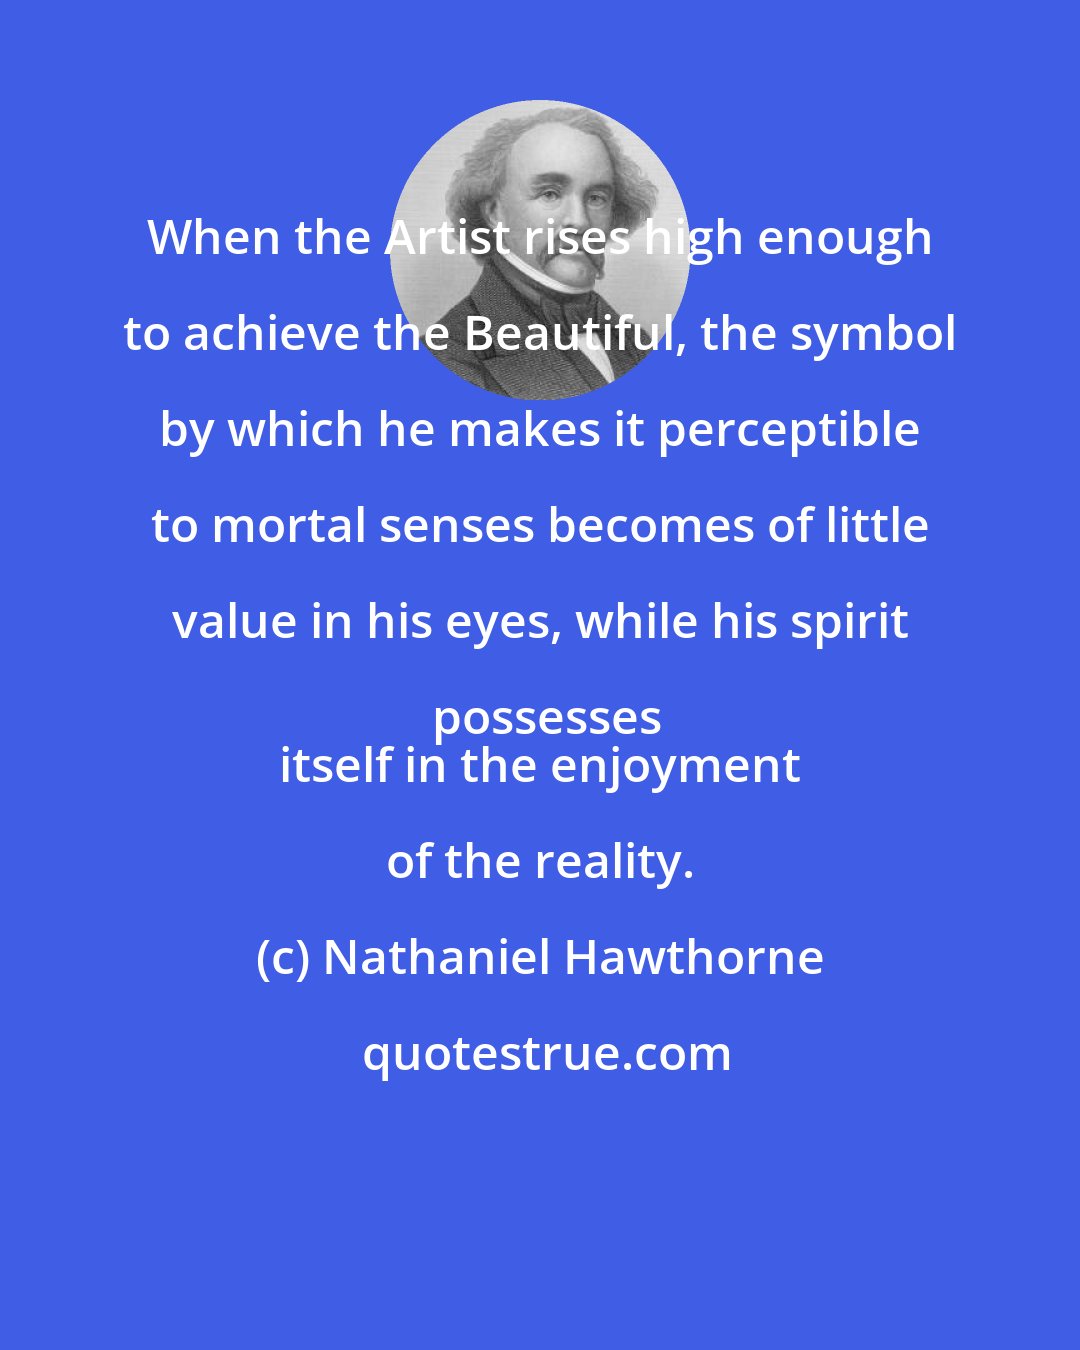 Nathaniel Hawthorne: When the Artist rises high enough to achieve the Beautiful, the symbol by which he makes it perceptible to mortal senses becomes of little value in his eyes, while his spirit possesses
 itself in the enjoyment of the reality.